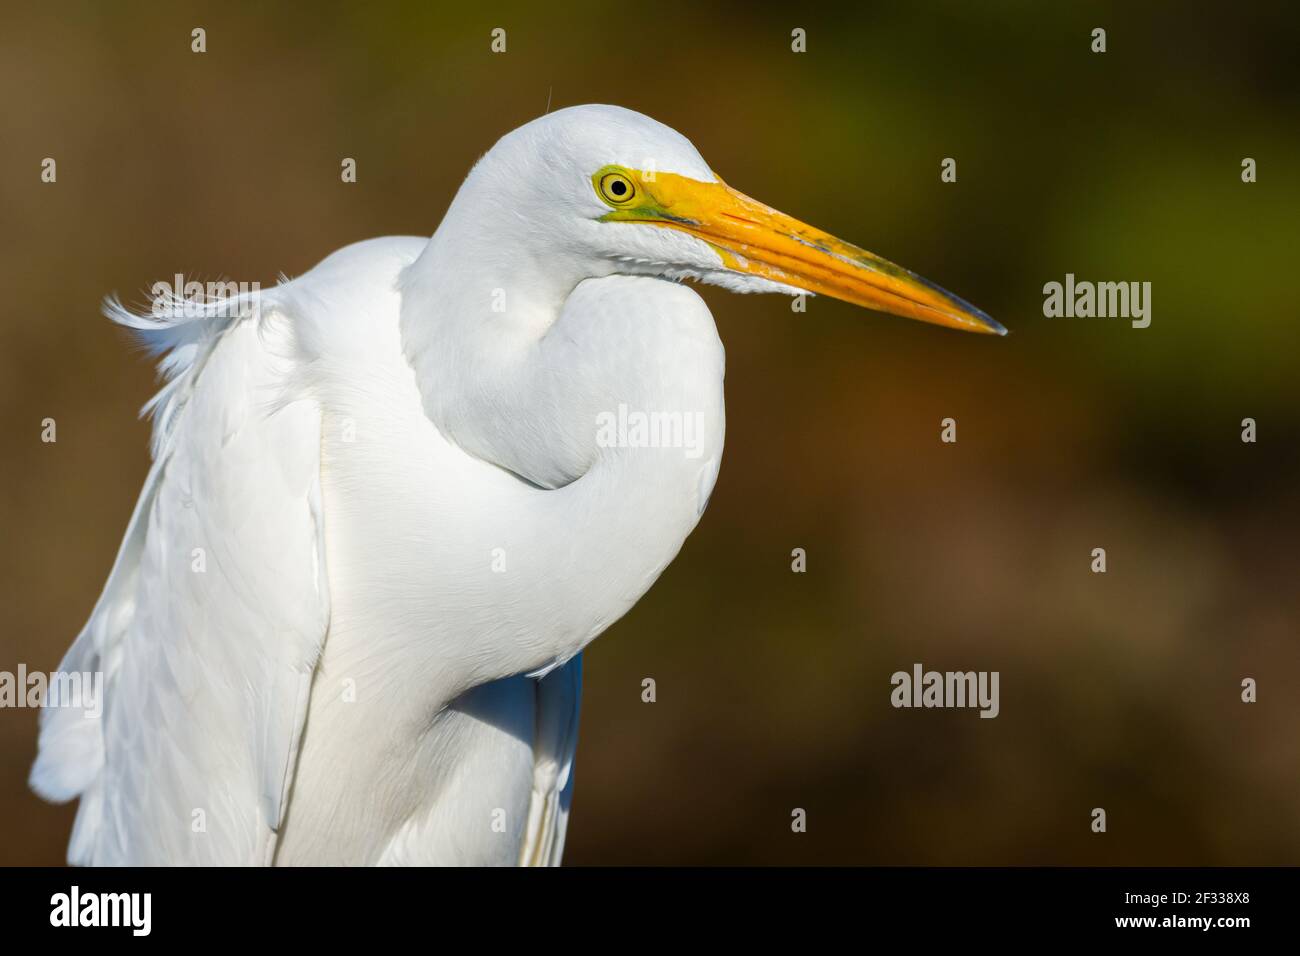 Close-up of a Great Egret. Great Egrets were once hunted nearly to extinction for their beautiful feathers. Stock Photo